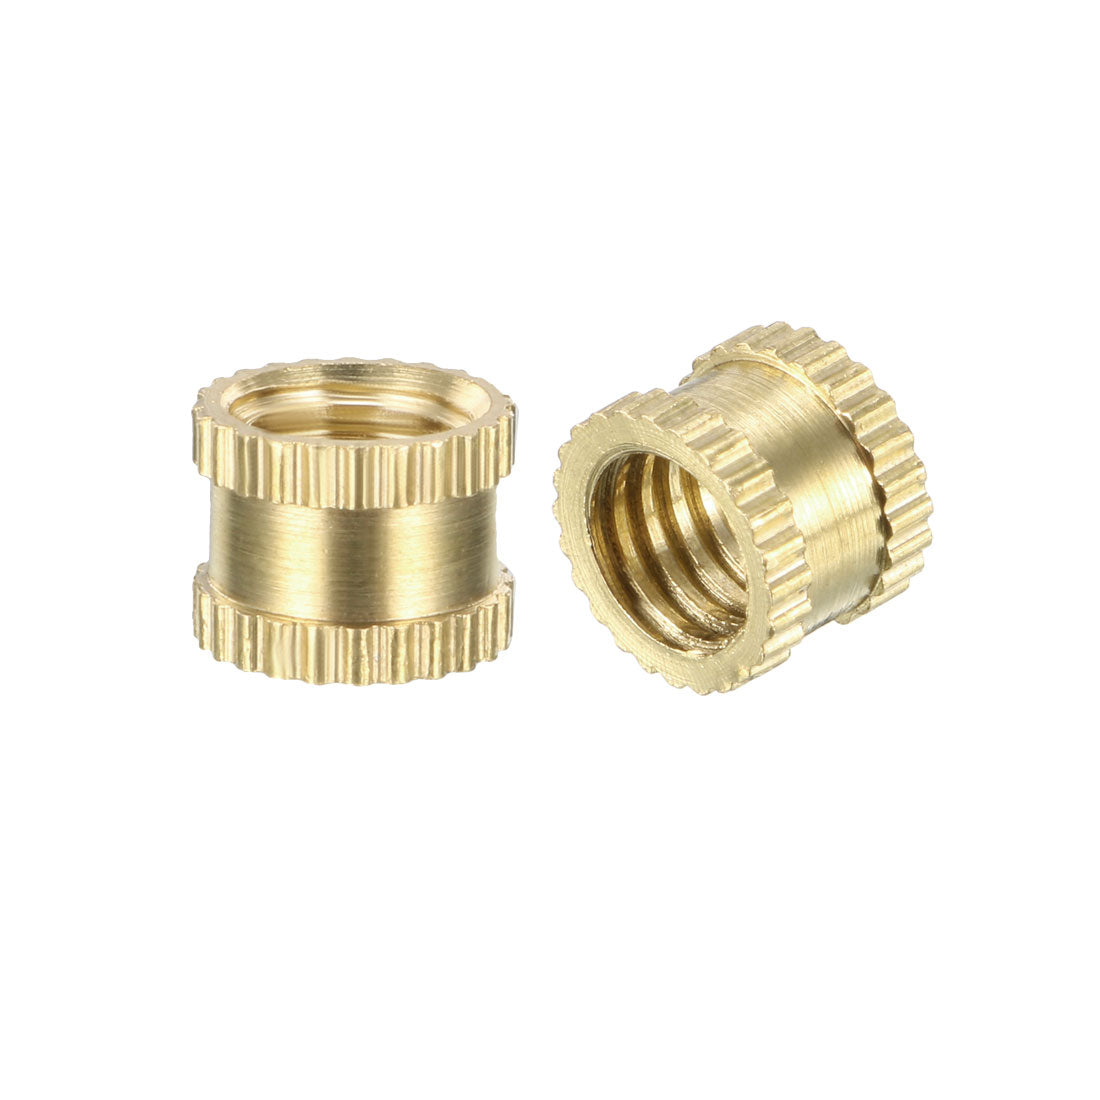 uxcell Uxcell M6 x 1mm Female Brass Knurled Threaded Insert Embedment Nut for 3D Printer, 50Pcs